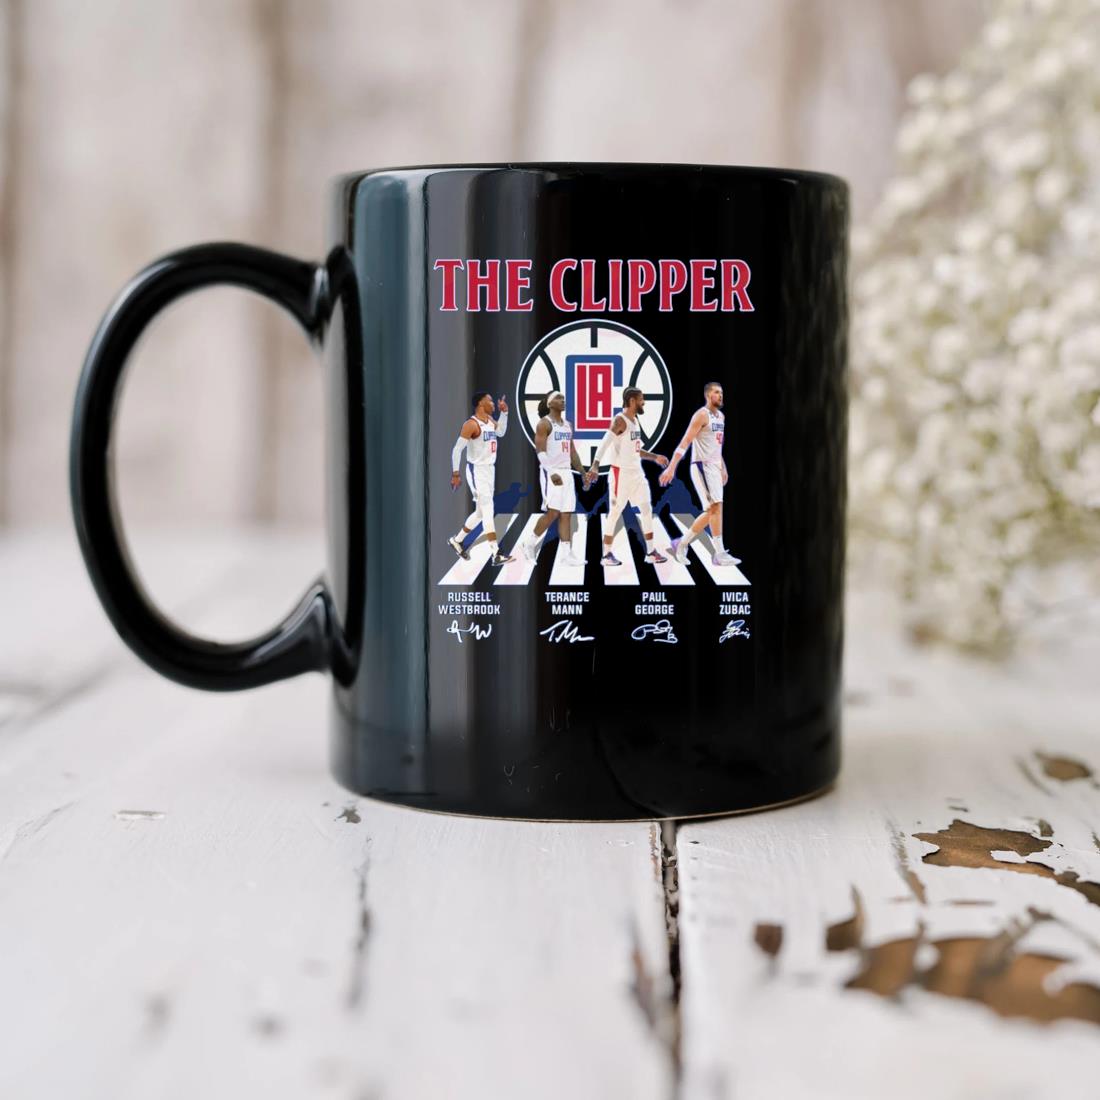 The Clipper Russell Westbrook And Terance Mann And Paul George And Ivica Zubac Signatures Mug